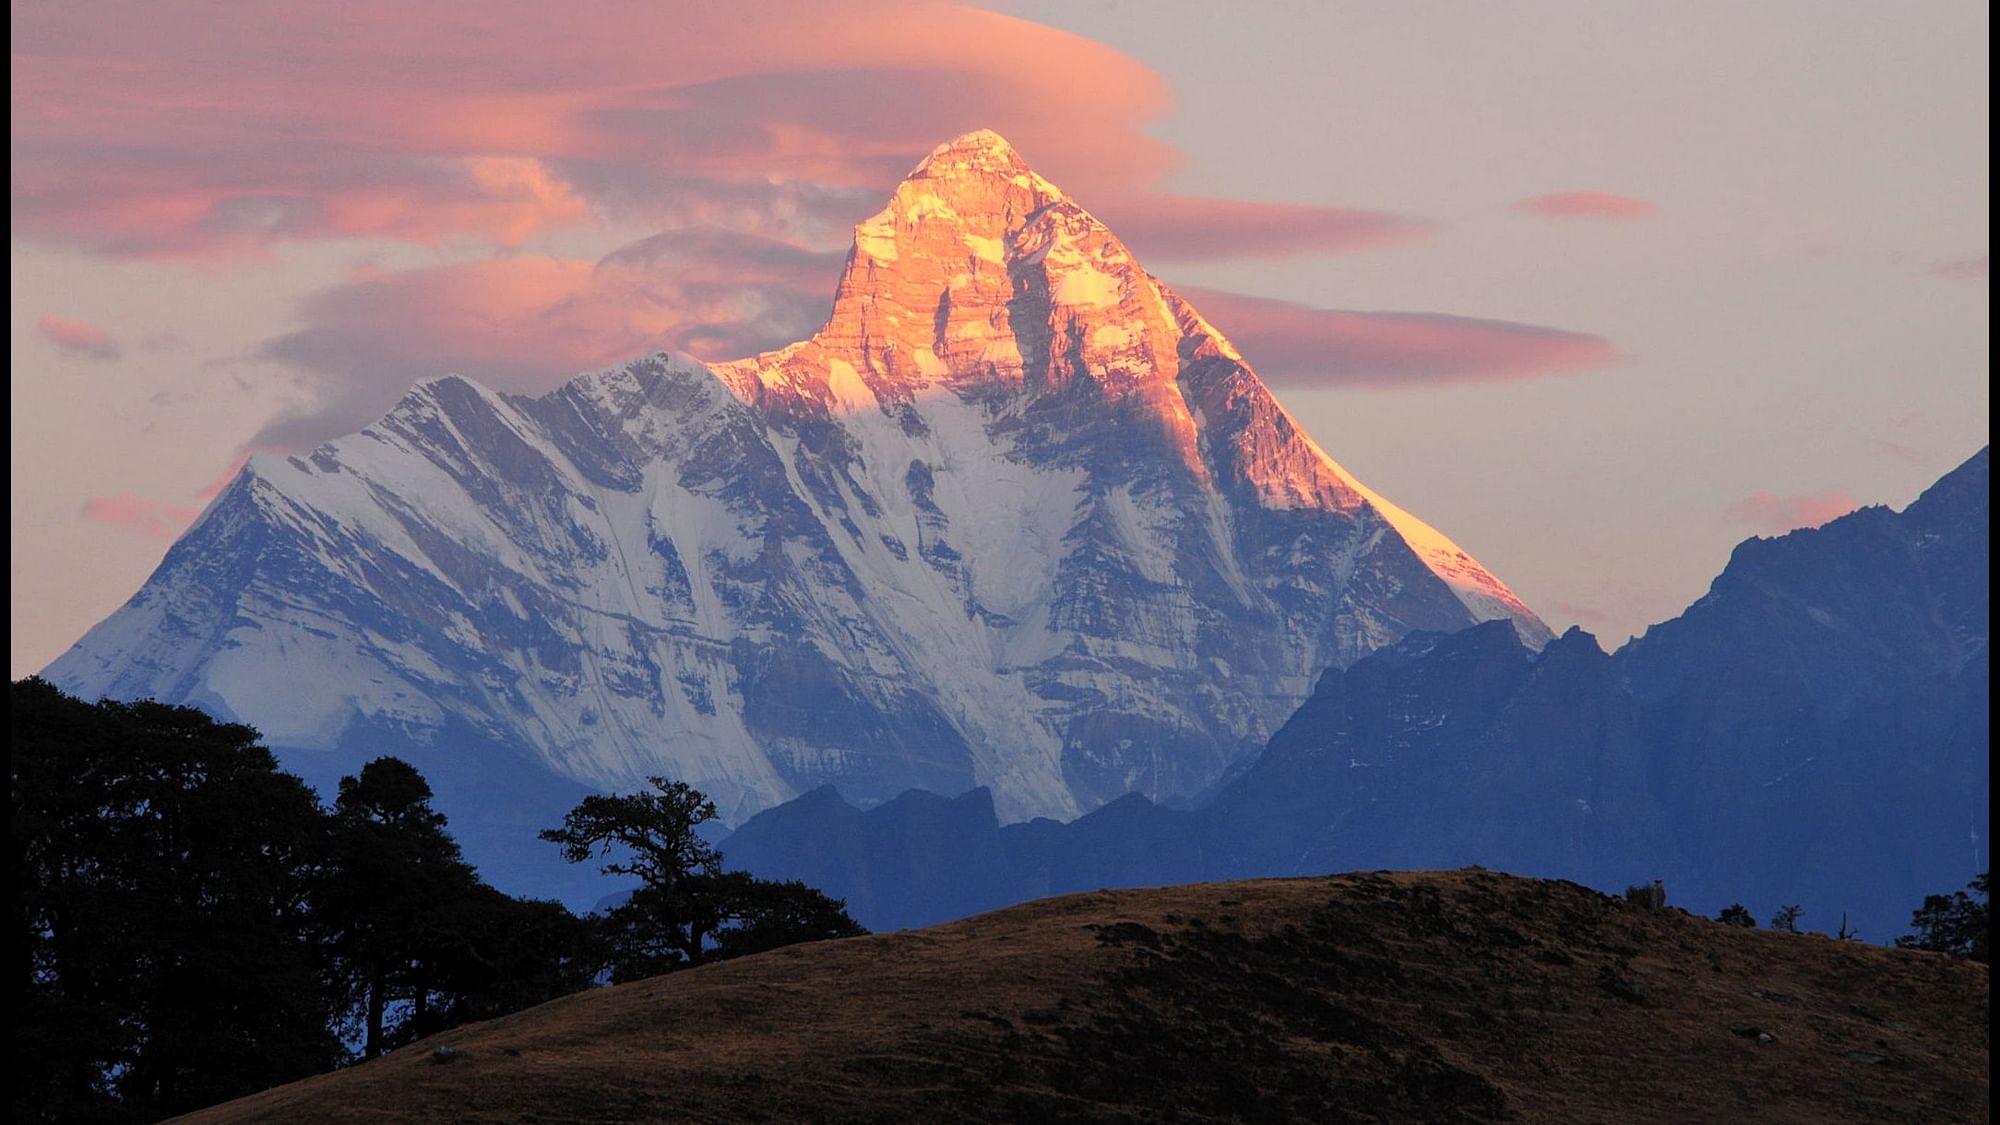 Indian air force pilots are scouring the Himalayan peak to search for the remaining three missing climbers.